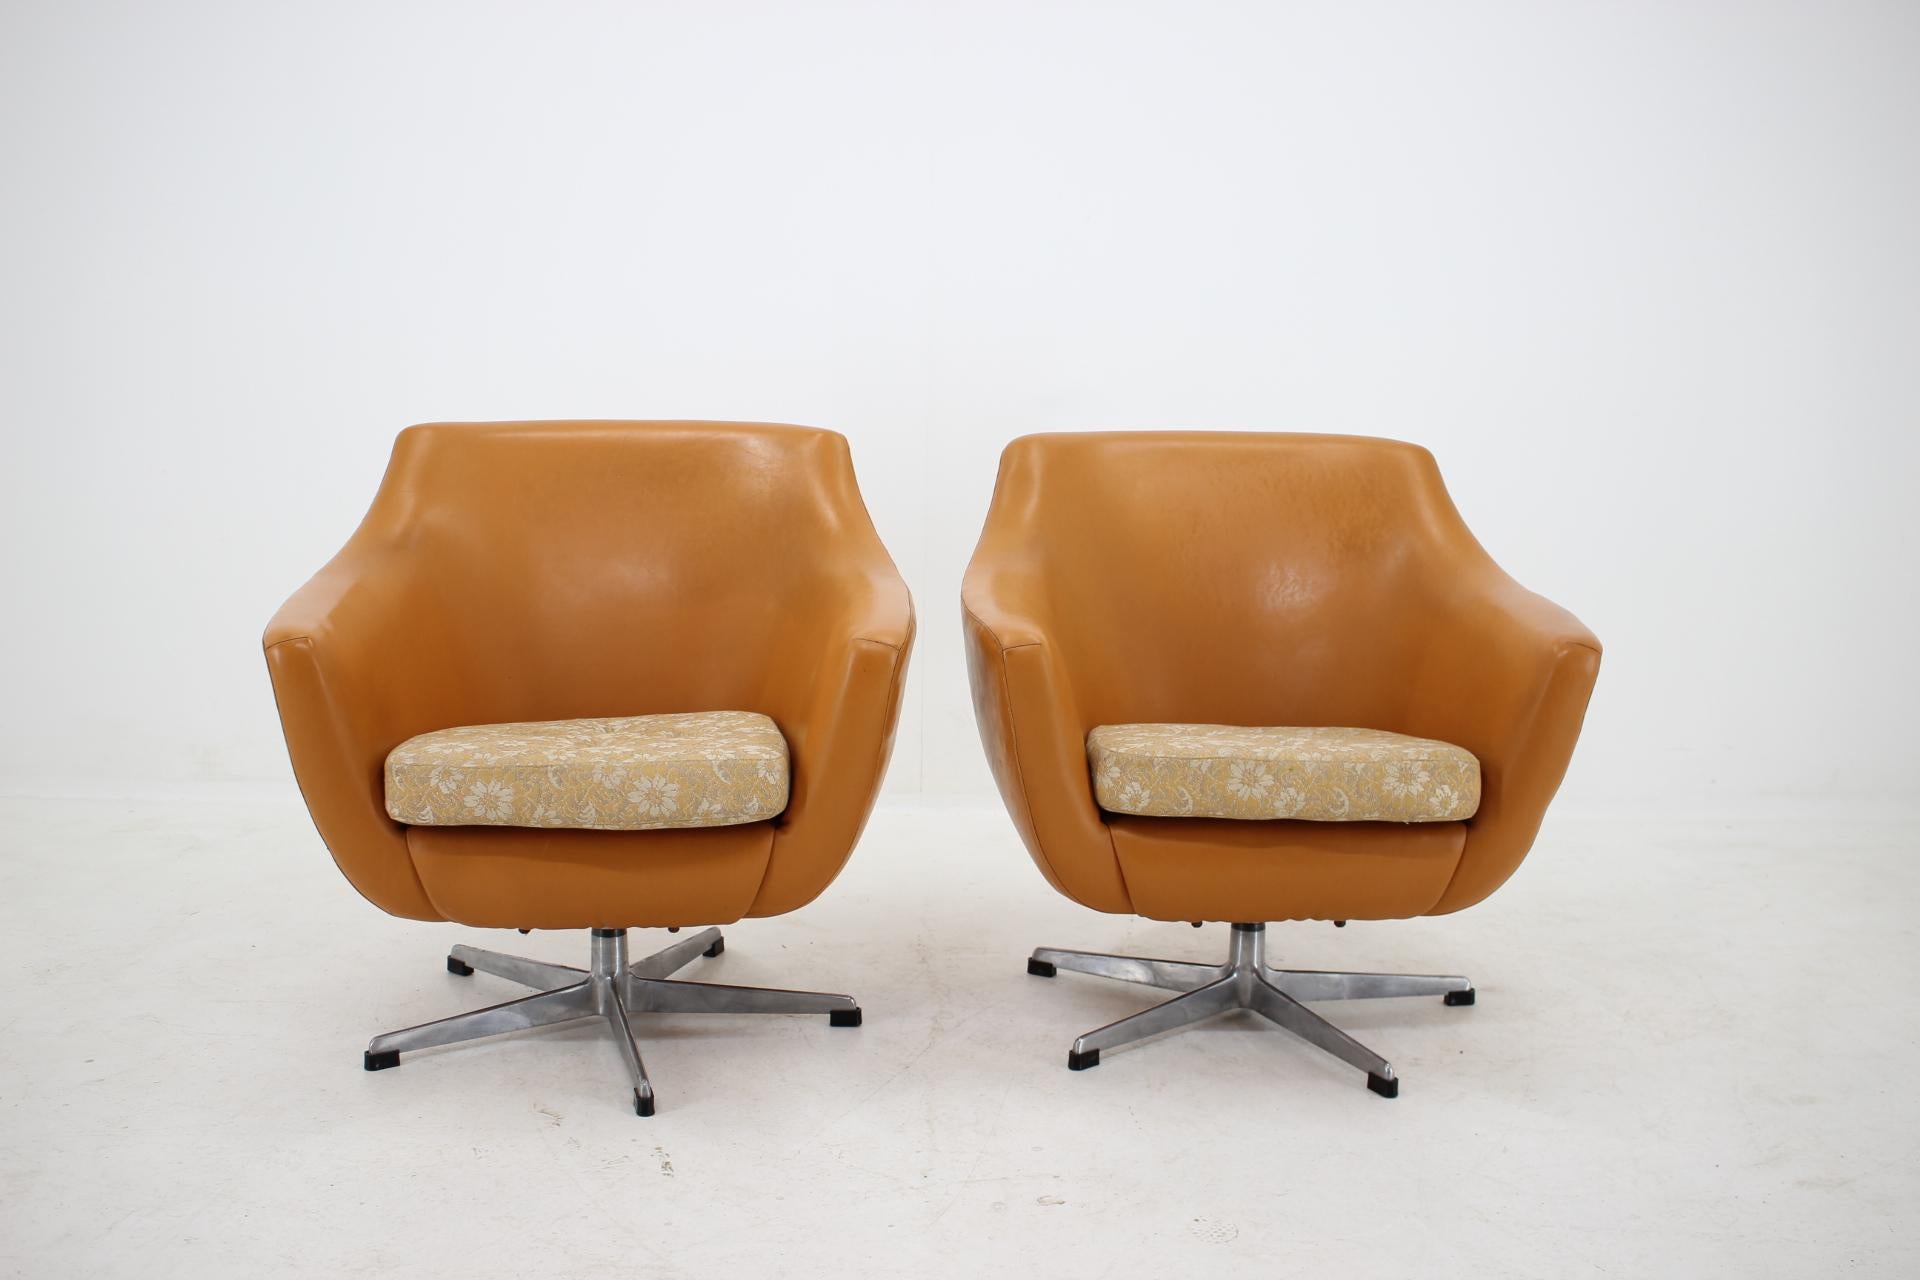 Made in Czechoslovakia
Made of leatherette, fabric, metal
Comfortable
Original condition.